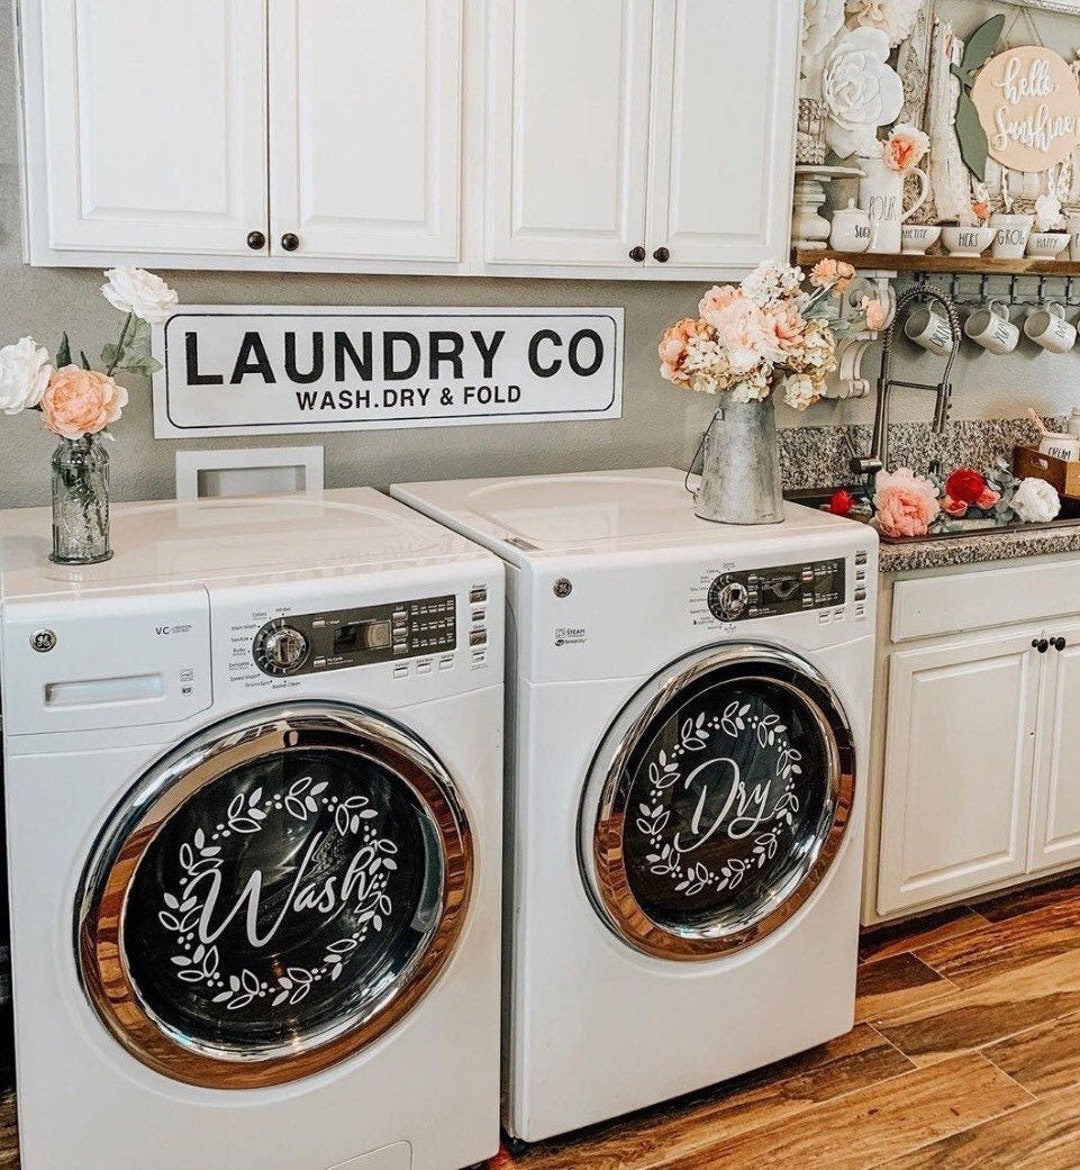 The Best Laundry Room Rugs 2022